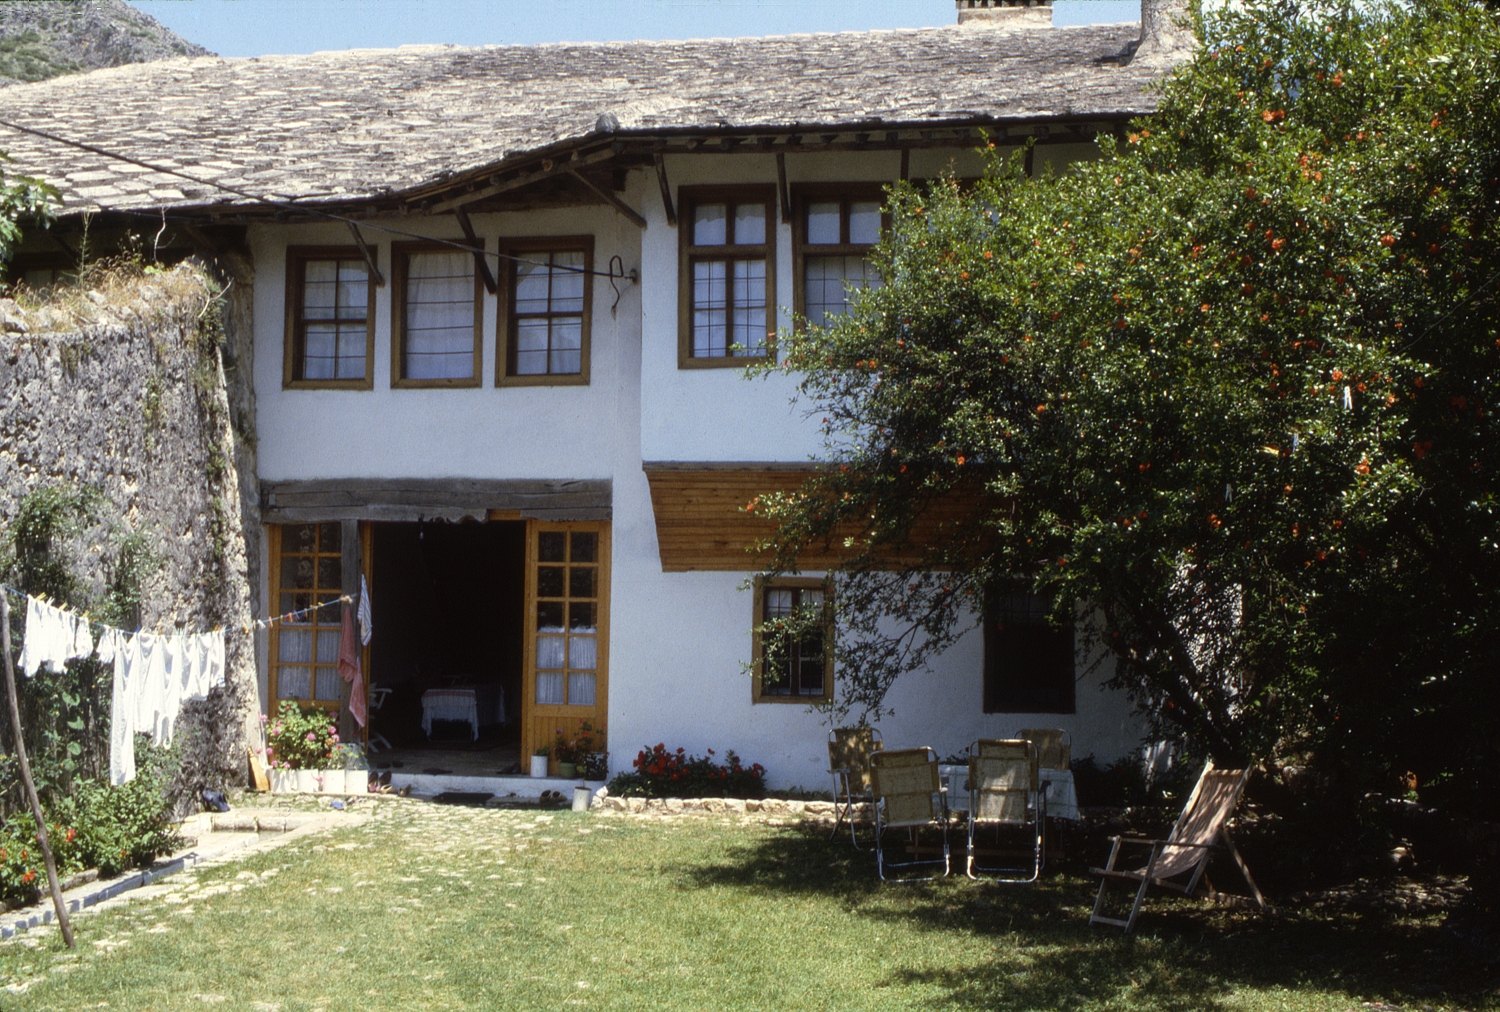 Right unit of double dwelling, Hasan-bey Rizvanbegović house. Exterior inner court from south.